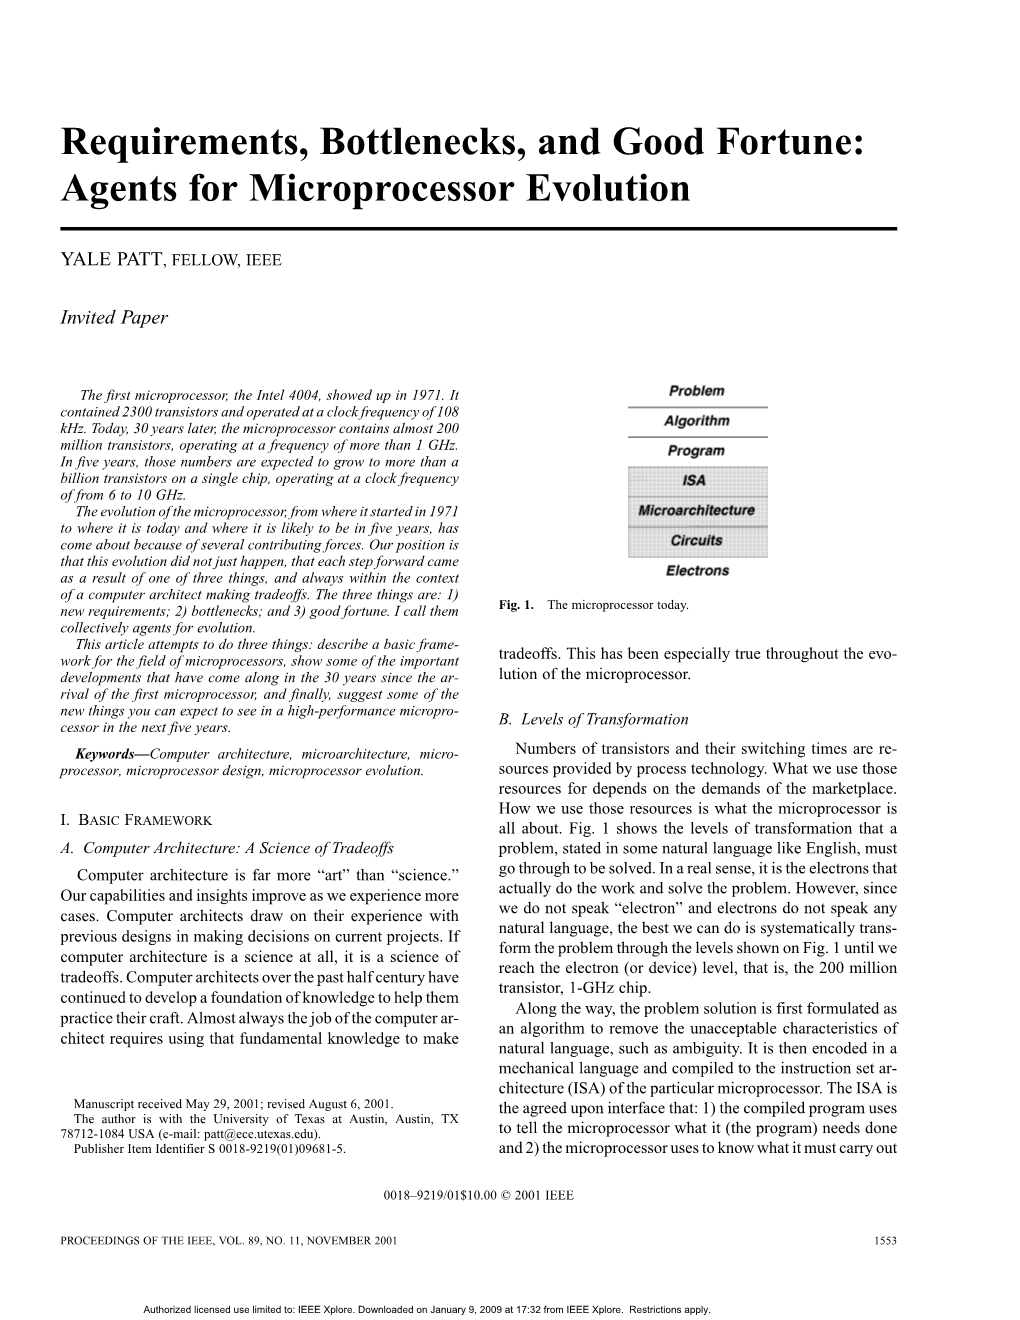 Requirements, Bottlenecks, and Good Fortune: Agents for Microprocessor Evolution